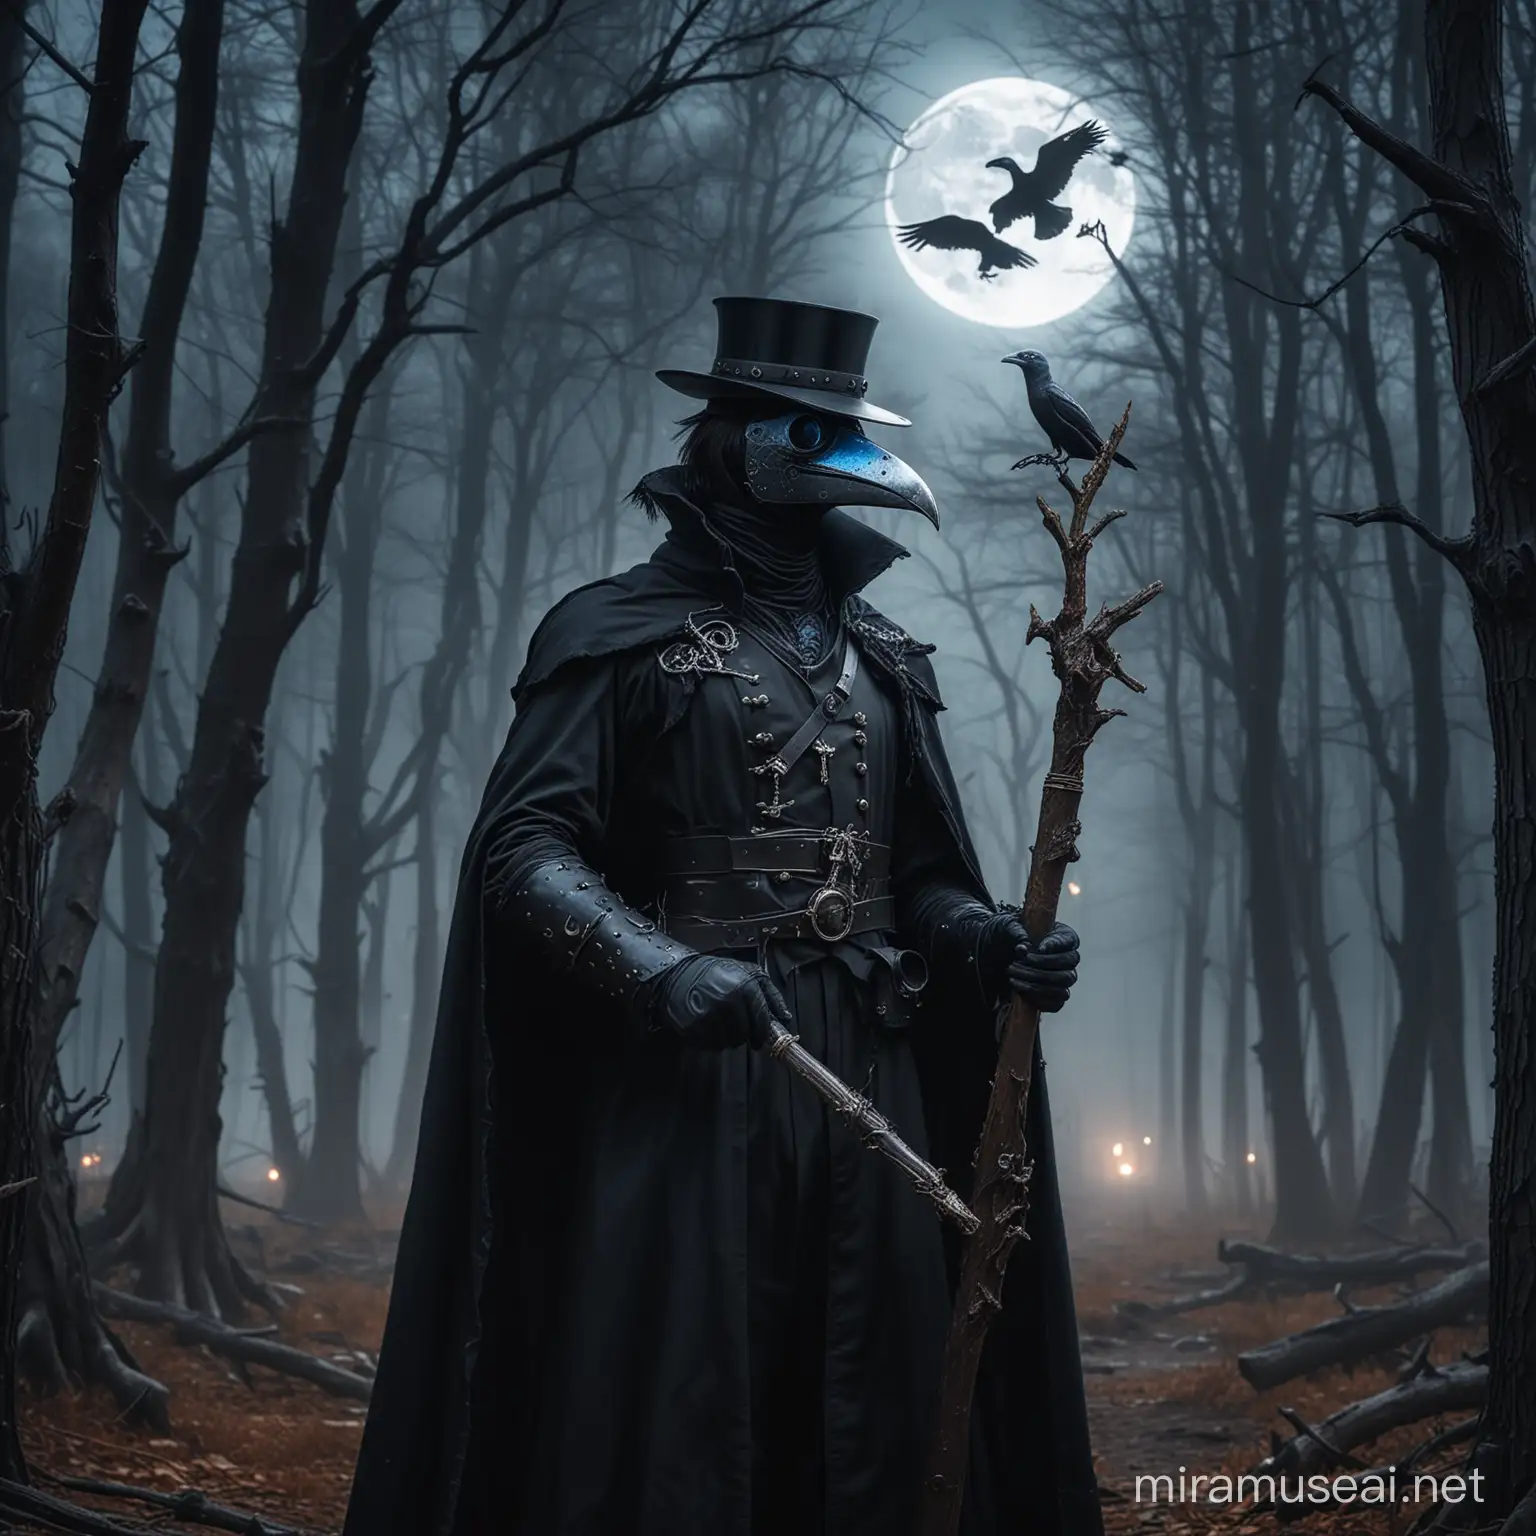 Steampunk Plague Doctor with Hermes Staff in Dark Forest Moonlight